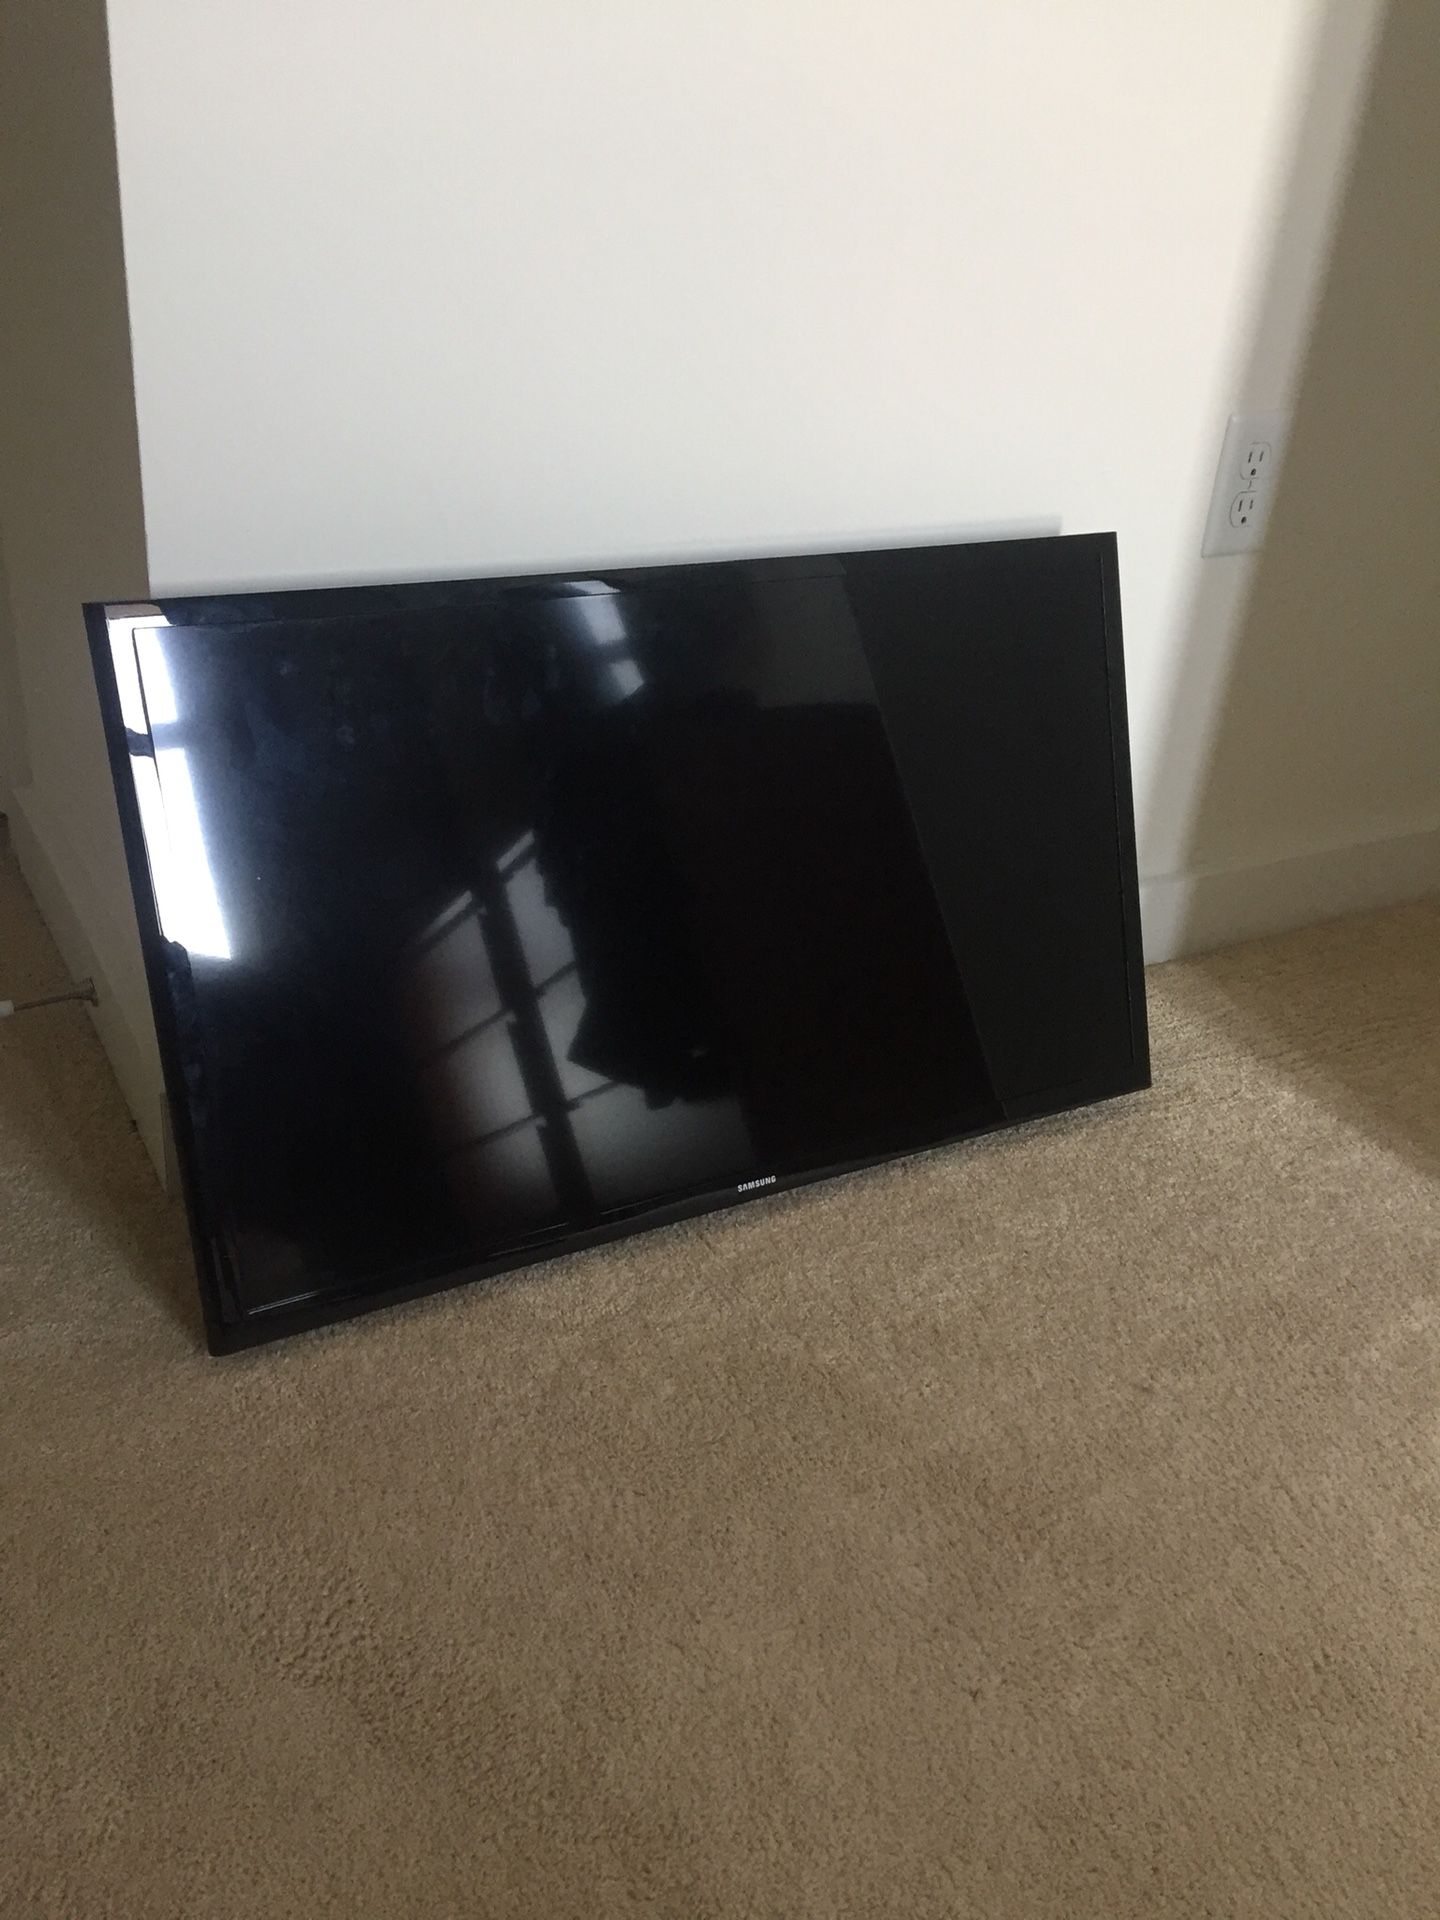 Samsung 34 inch flat screen 1080p HDTV with wall mount